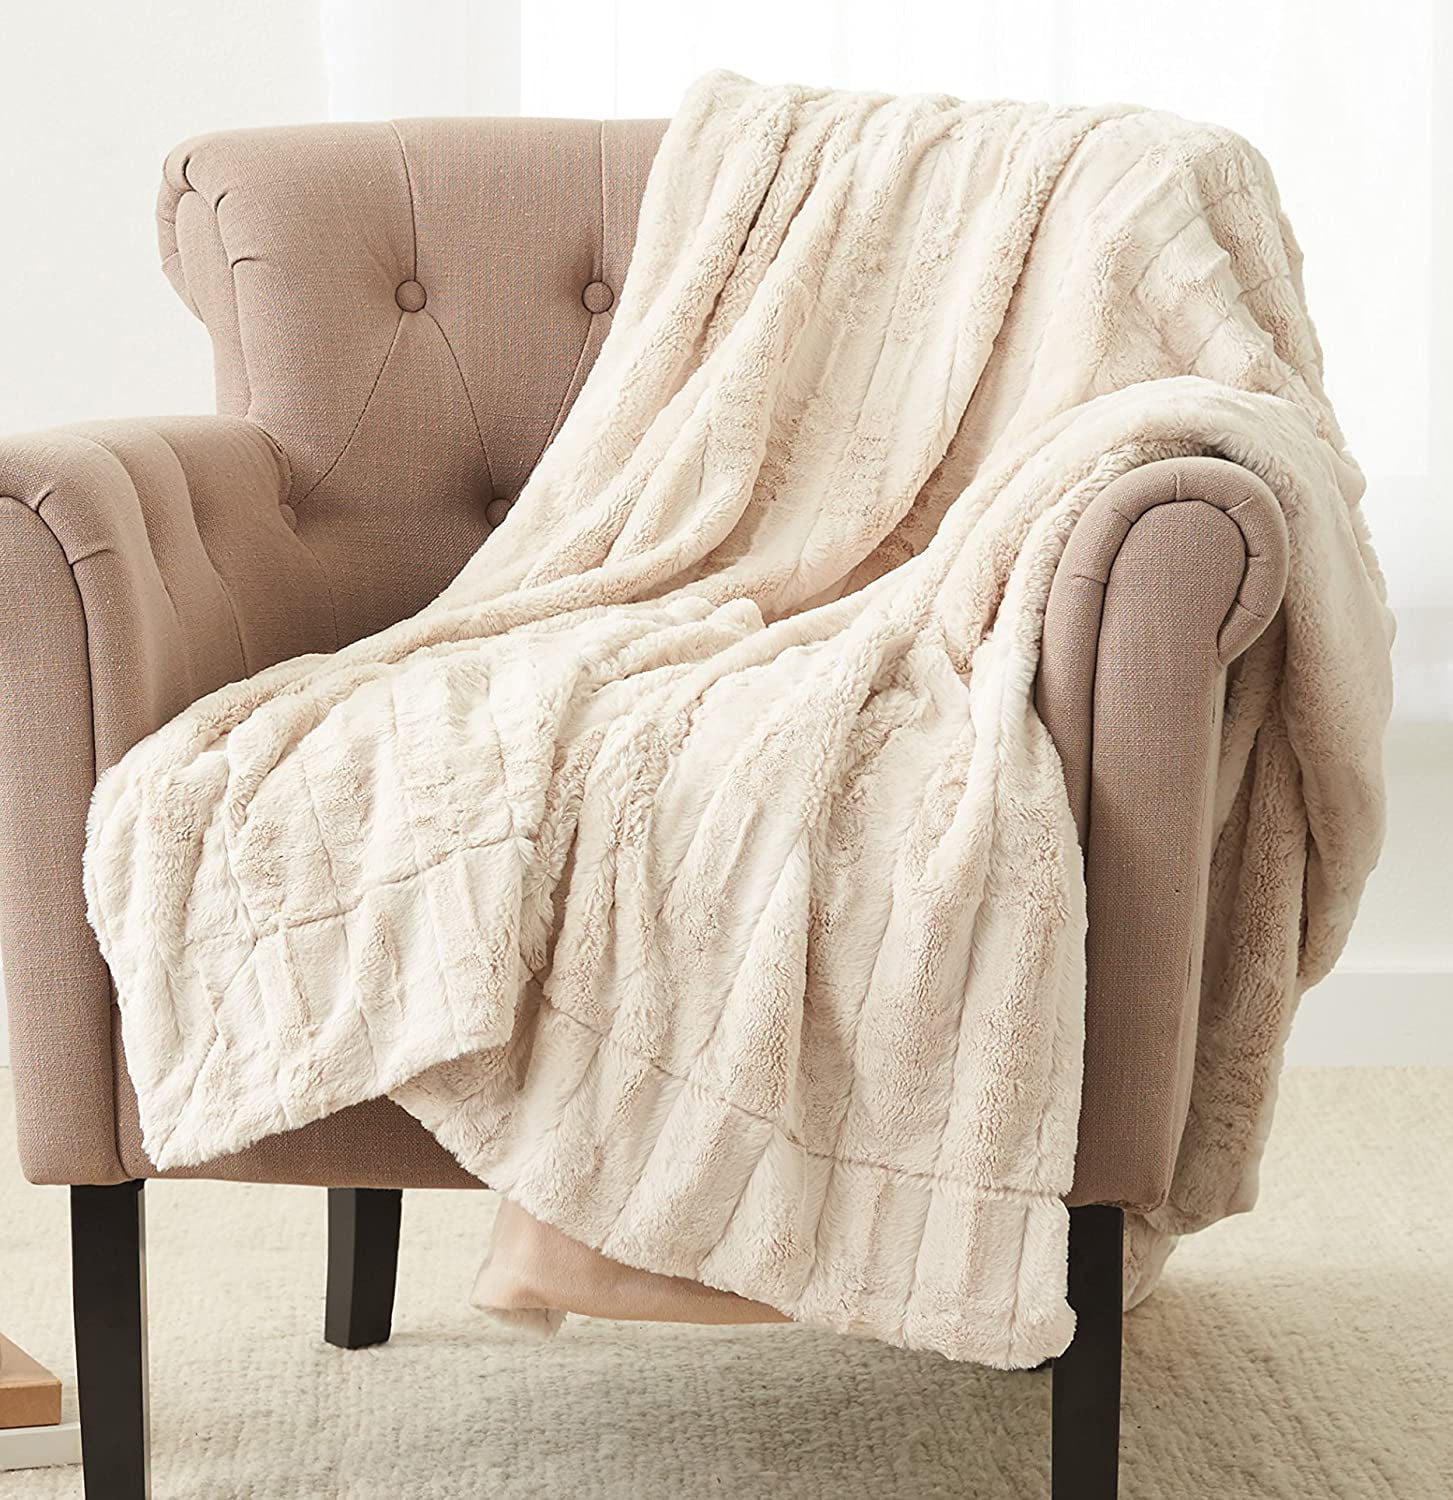 Details about   Luxury Throw Blanket 50 X 60in Stylish Super Soft In Ivory Warmth 